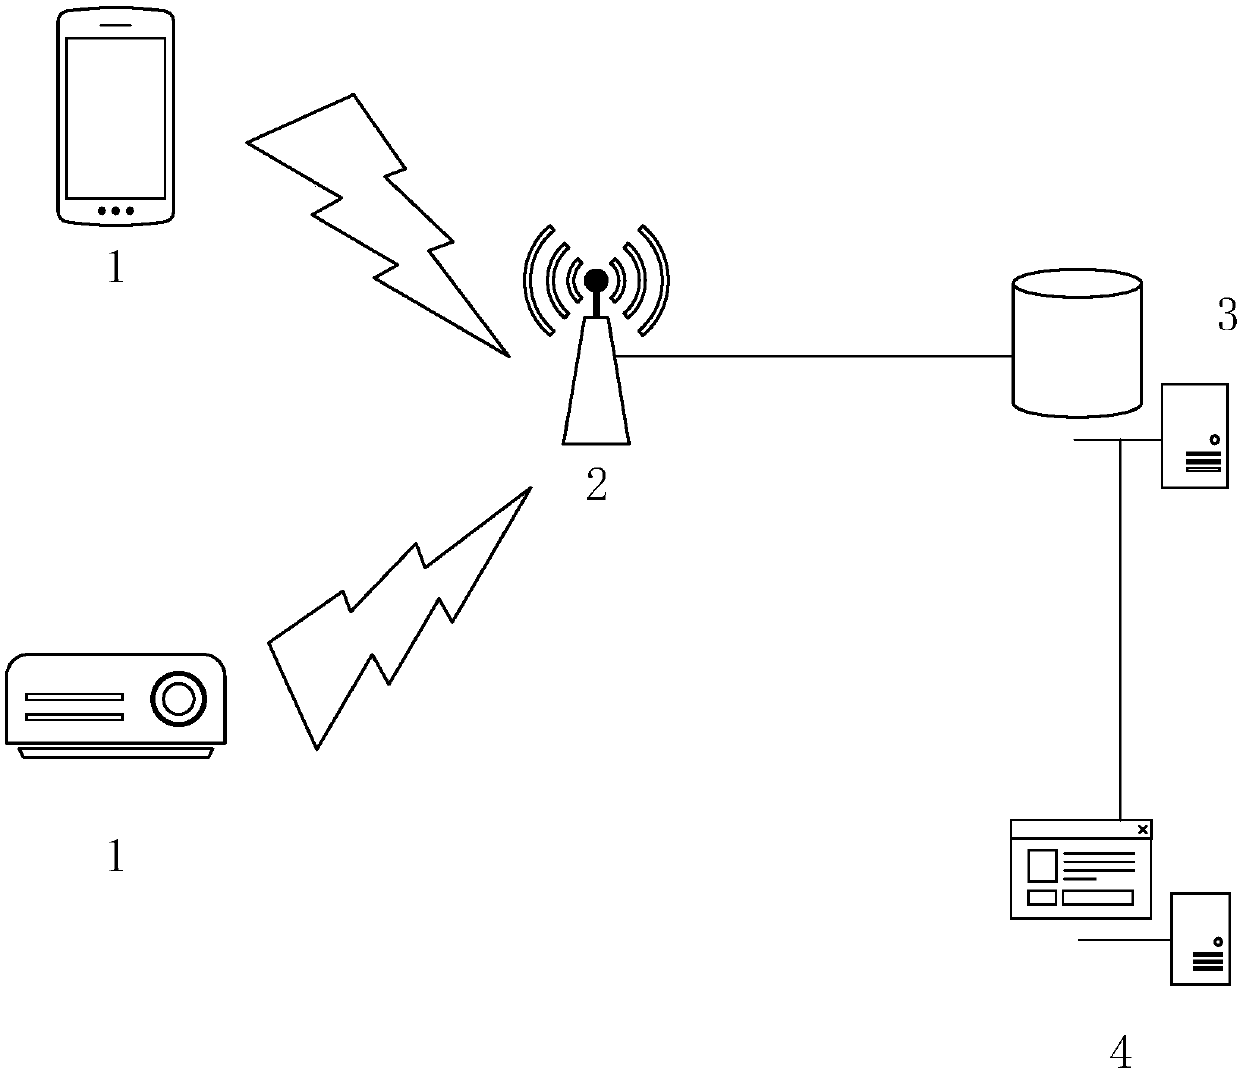 Commercial integrated cloud application system based on wireless connection